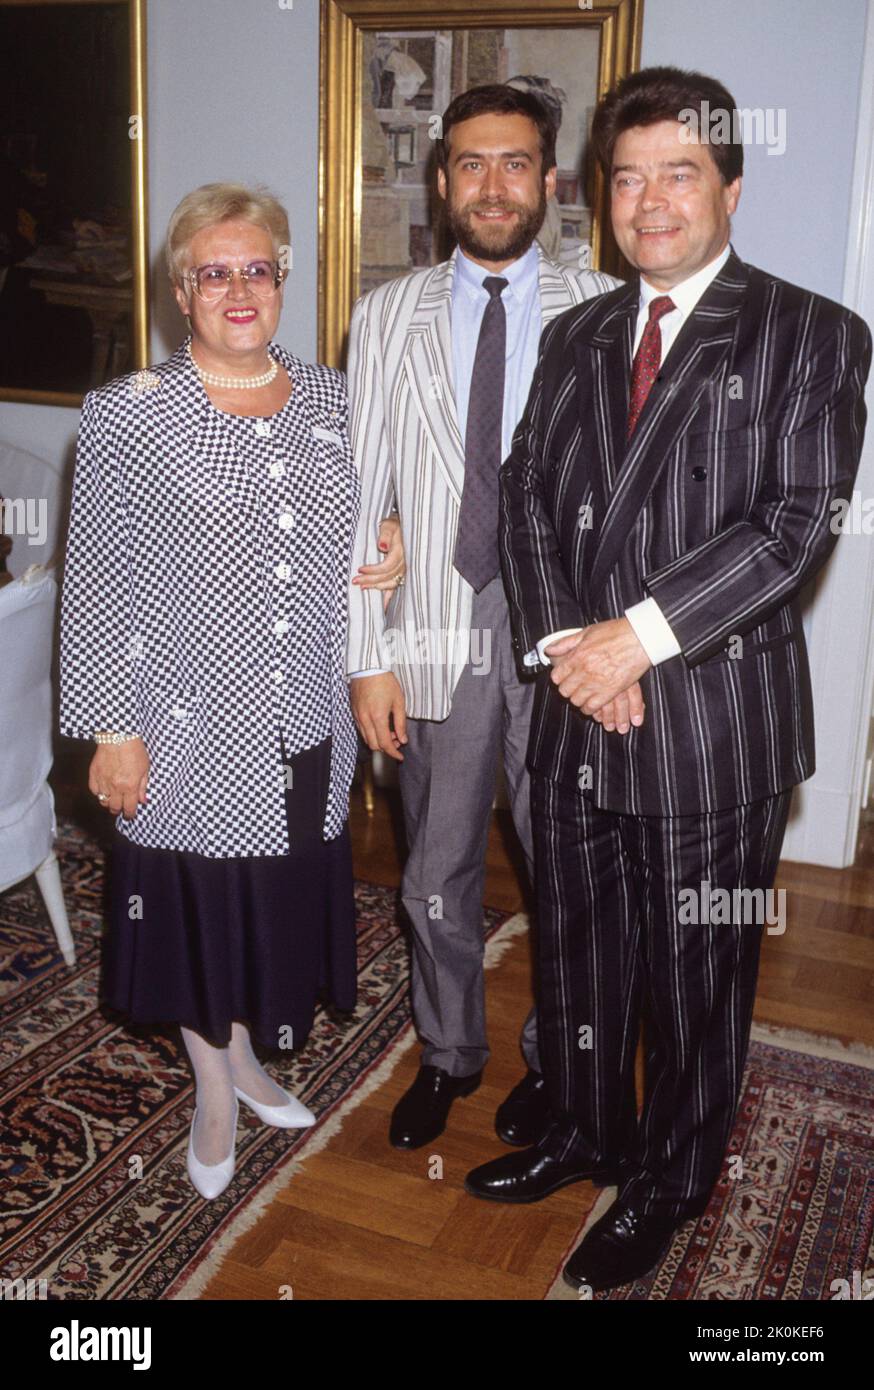 Boris Pankin Soviet ambassador in Sweden who after the fall of the Soviet Union stayed behind and settled in Sweden.Here with wife Valentina and one of his sons Stock Photo